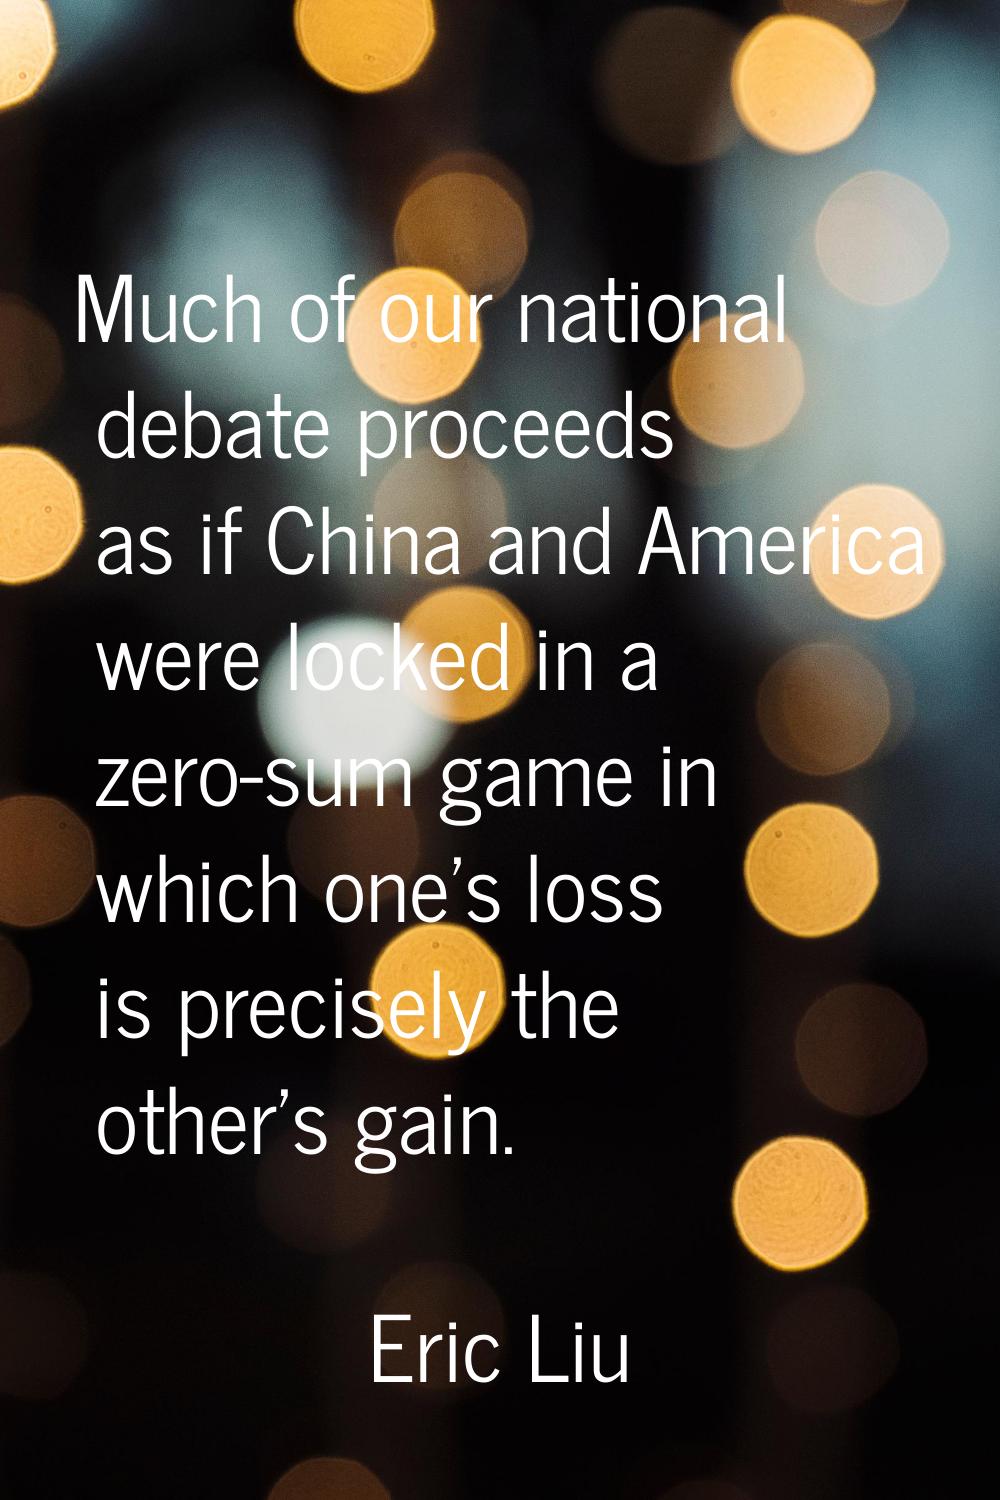 Much of our national debate proceeds as if China and America were locked in a zero-sum game in whic